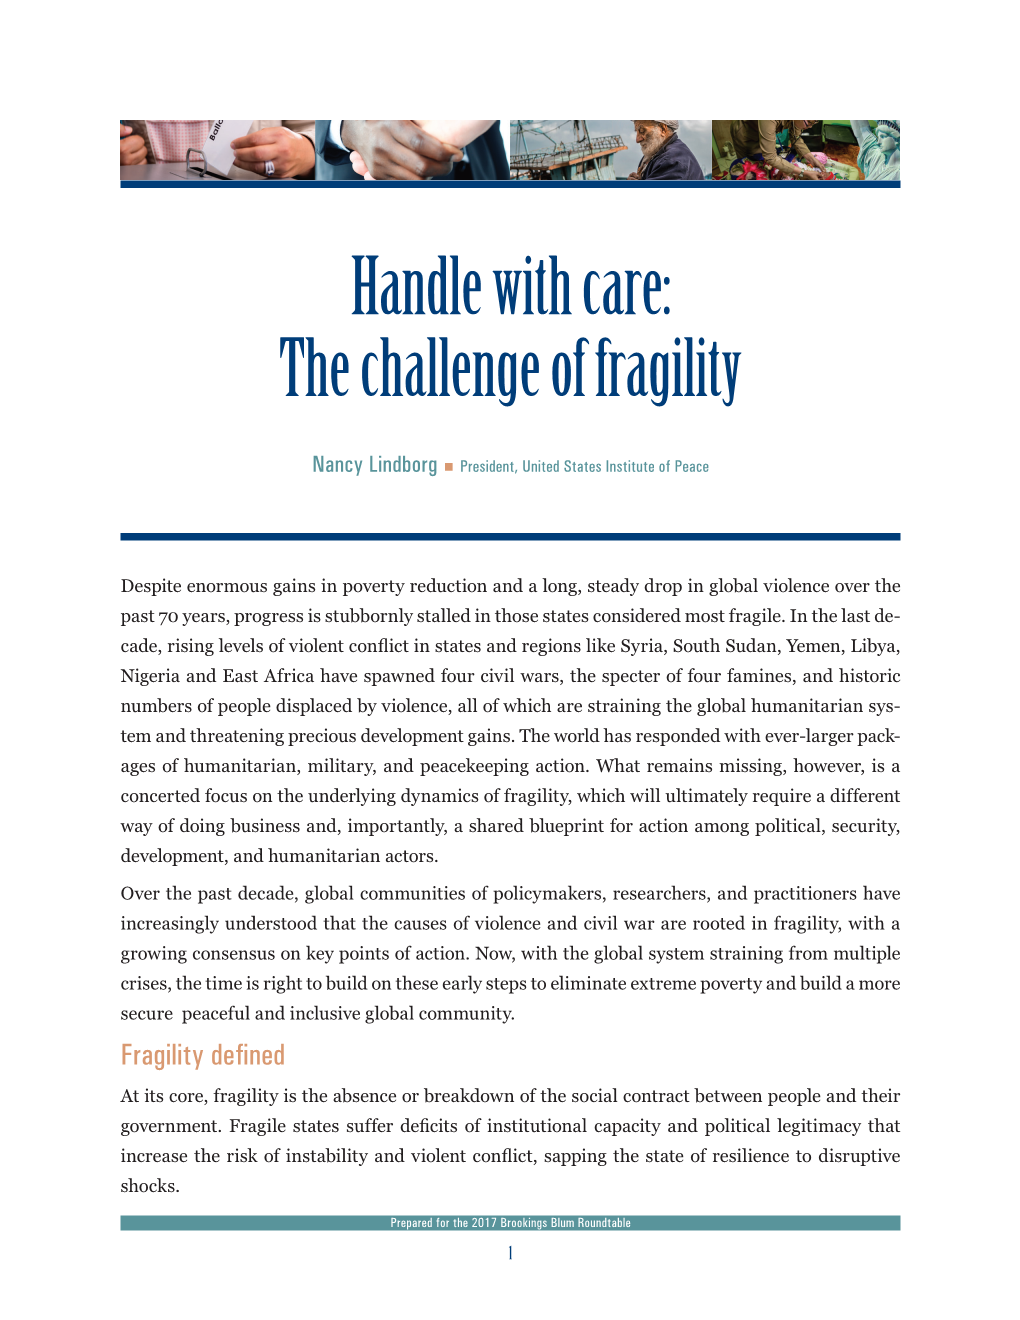 The Challenge of Fragility